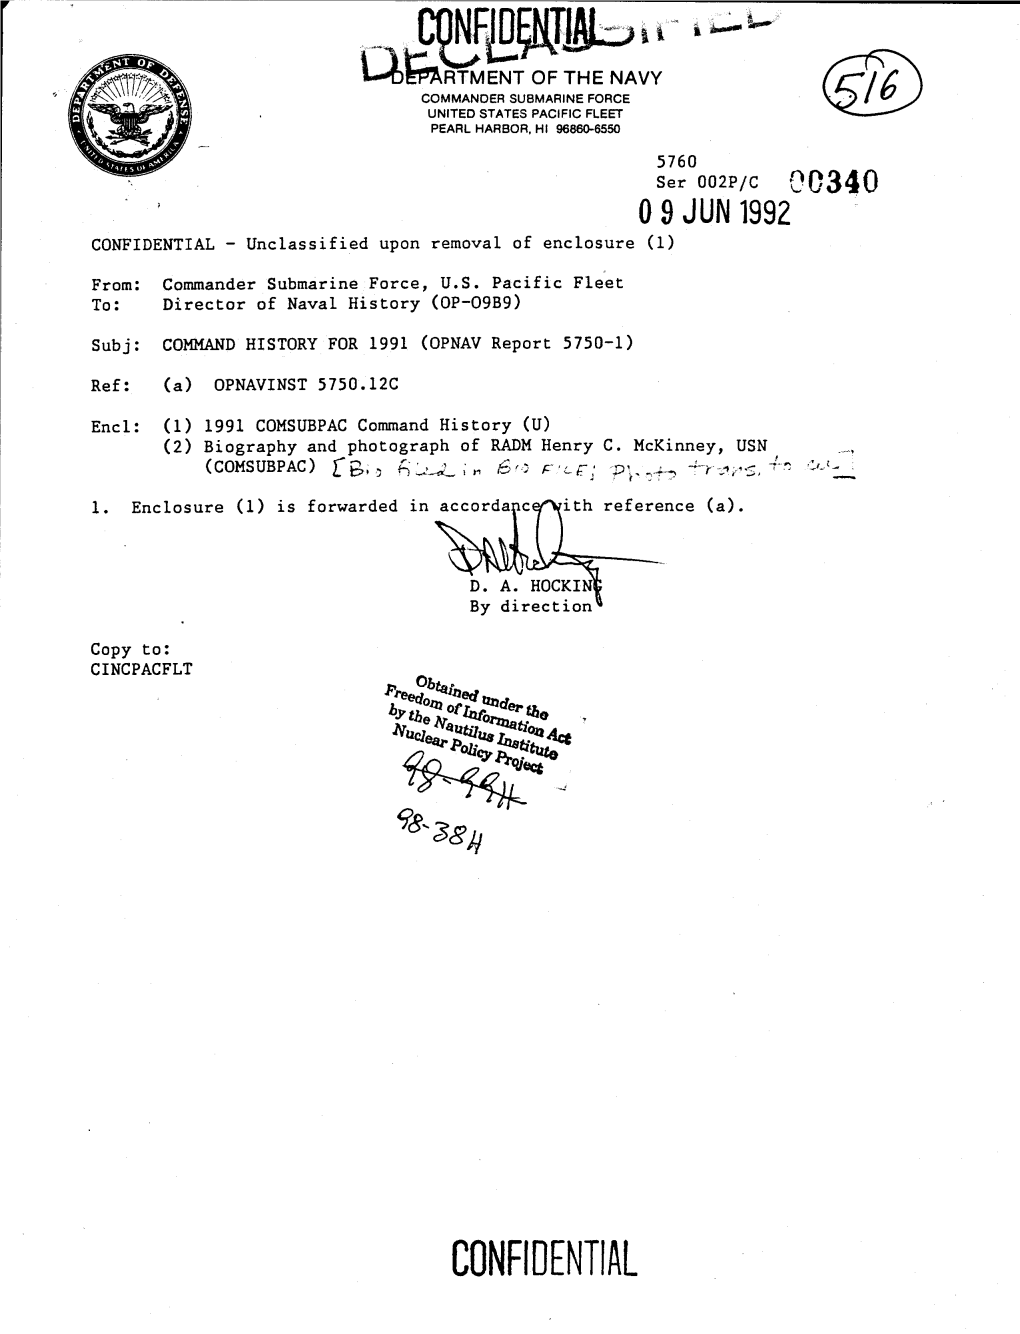 CONFIDENTIAL - Unclassified Upon Removal of Enclosure (1)